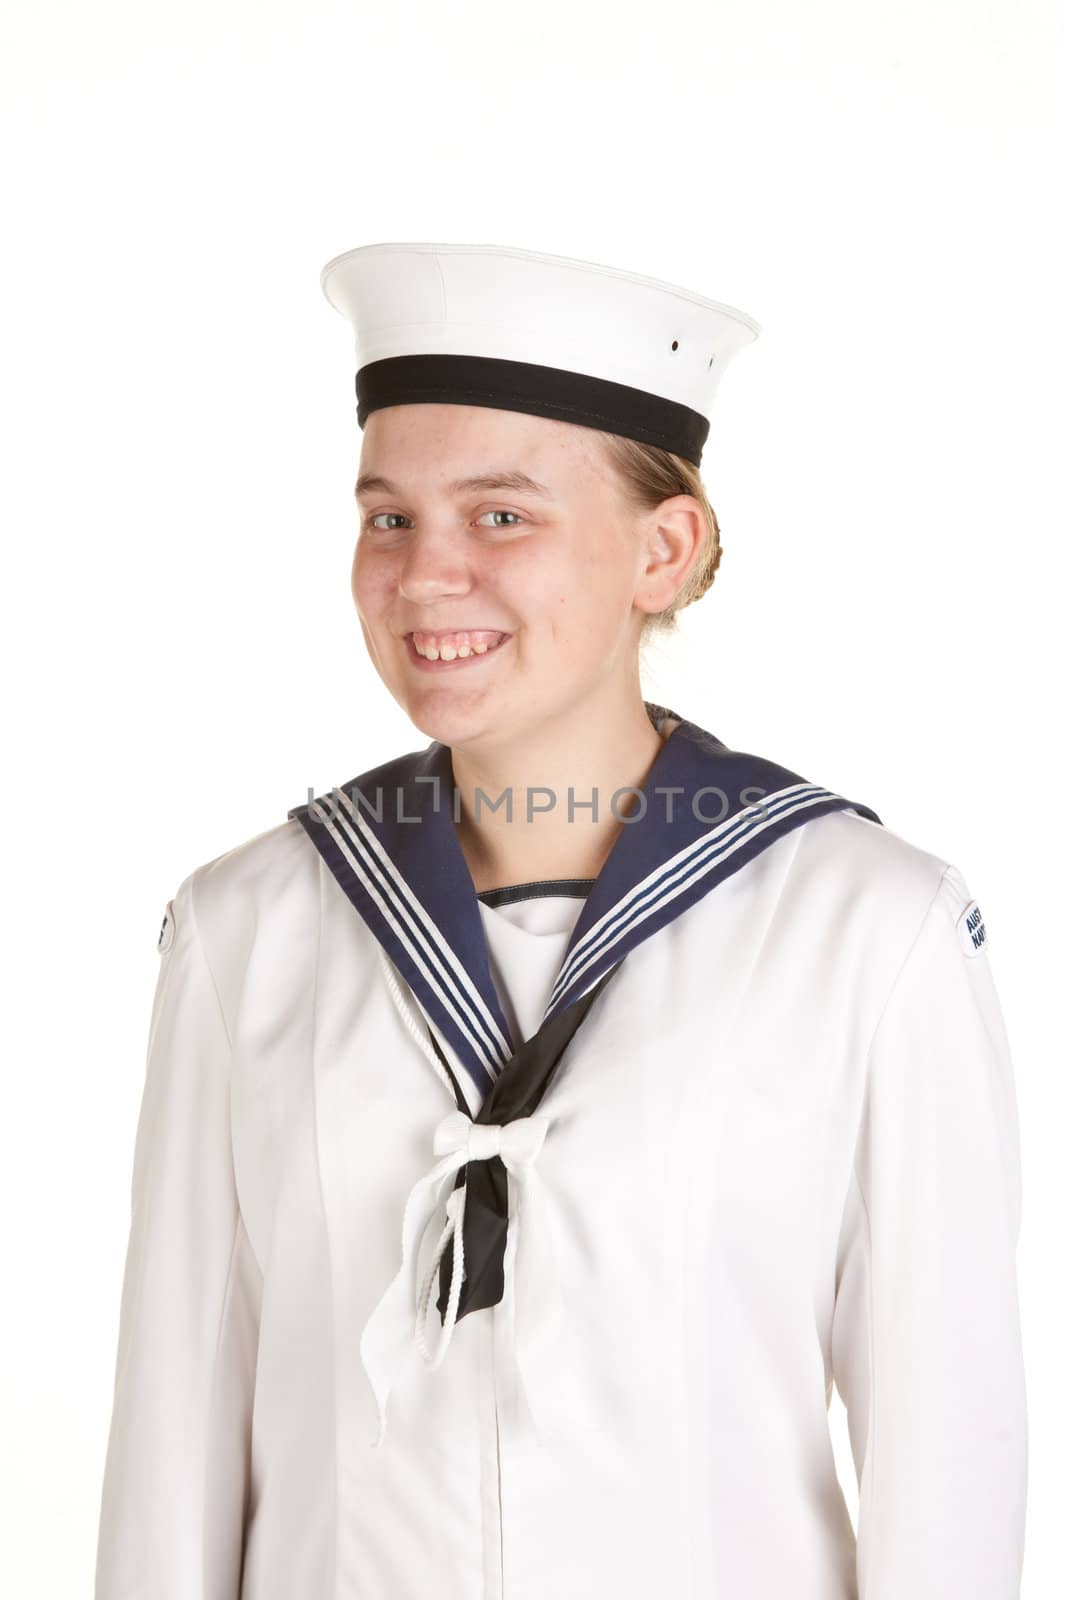 young female sailor isolated on white